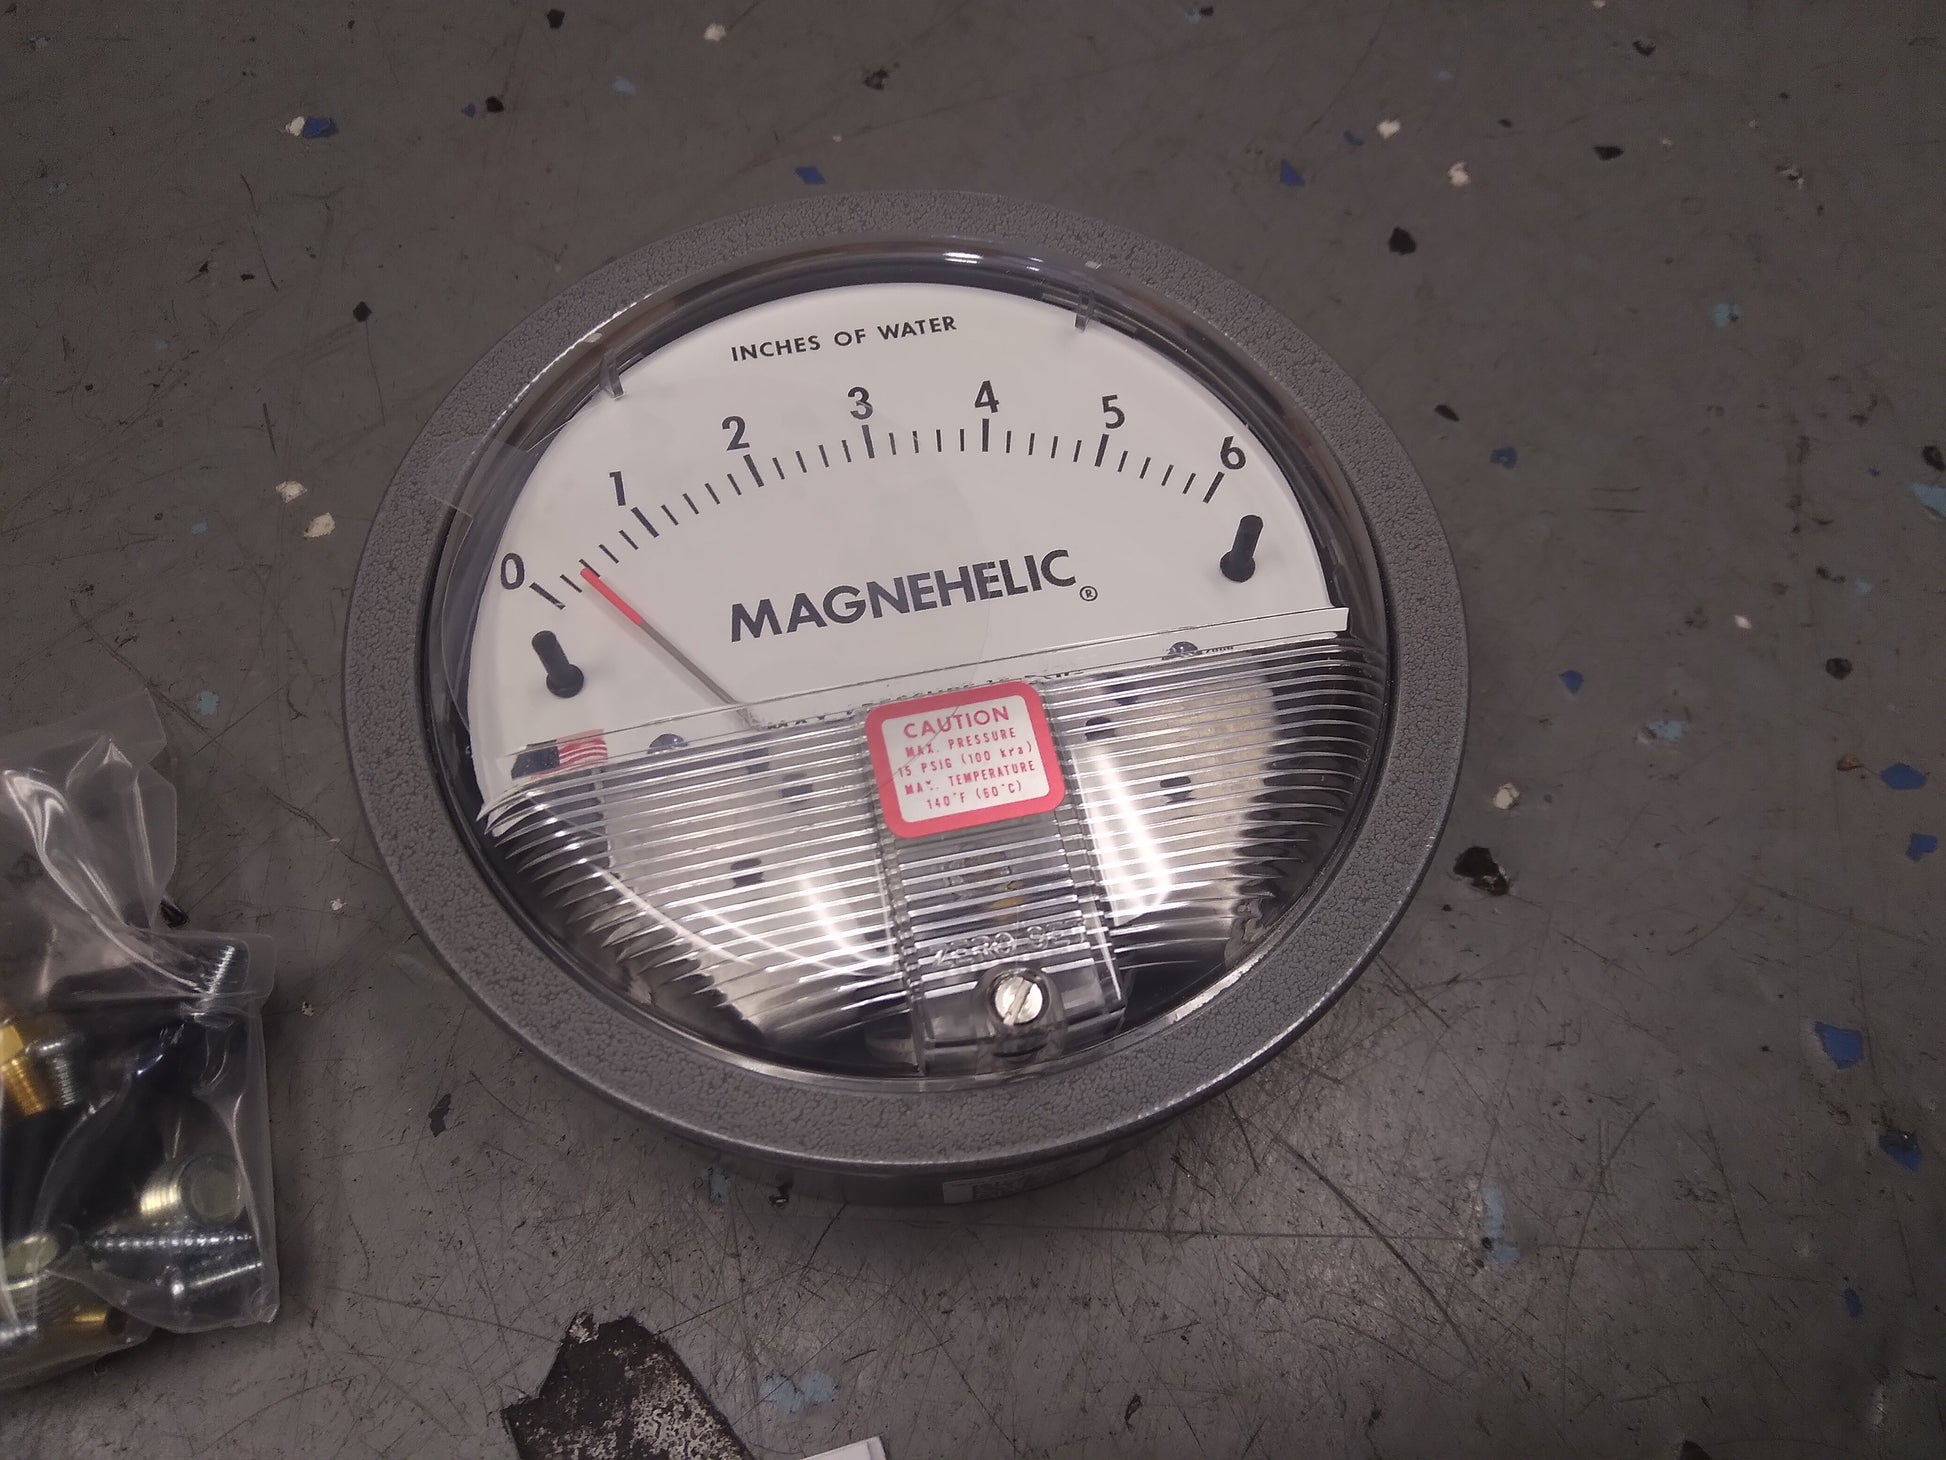 MAGNEHELIC DIFFERENTIAL PRESSURE GAUGE.TYPE 0 TO 6" WC